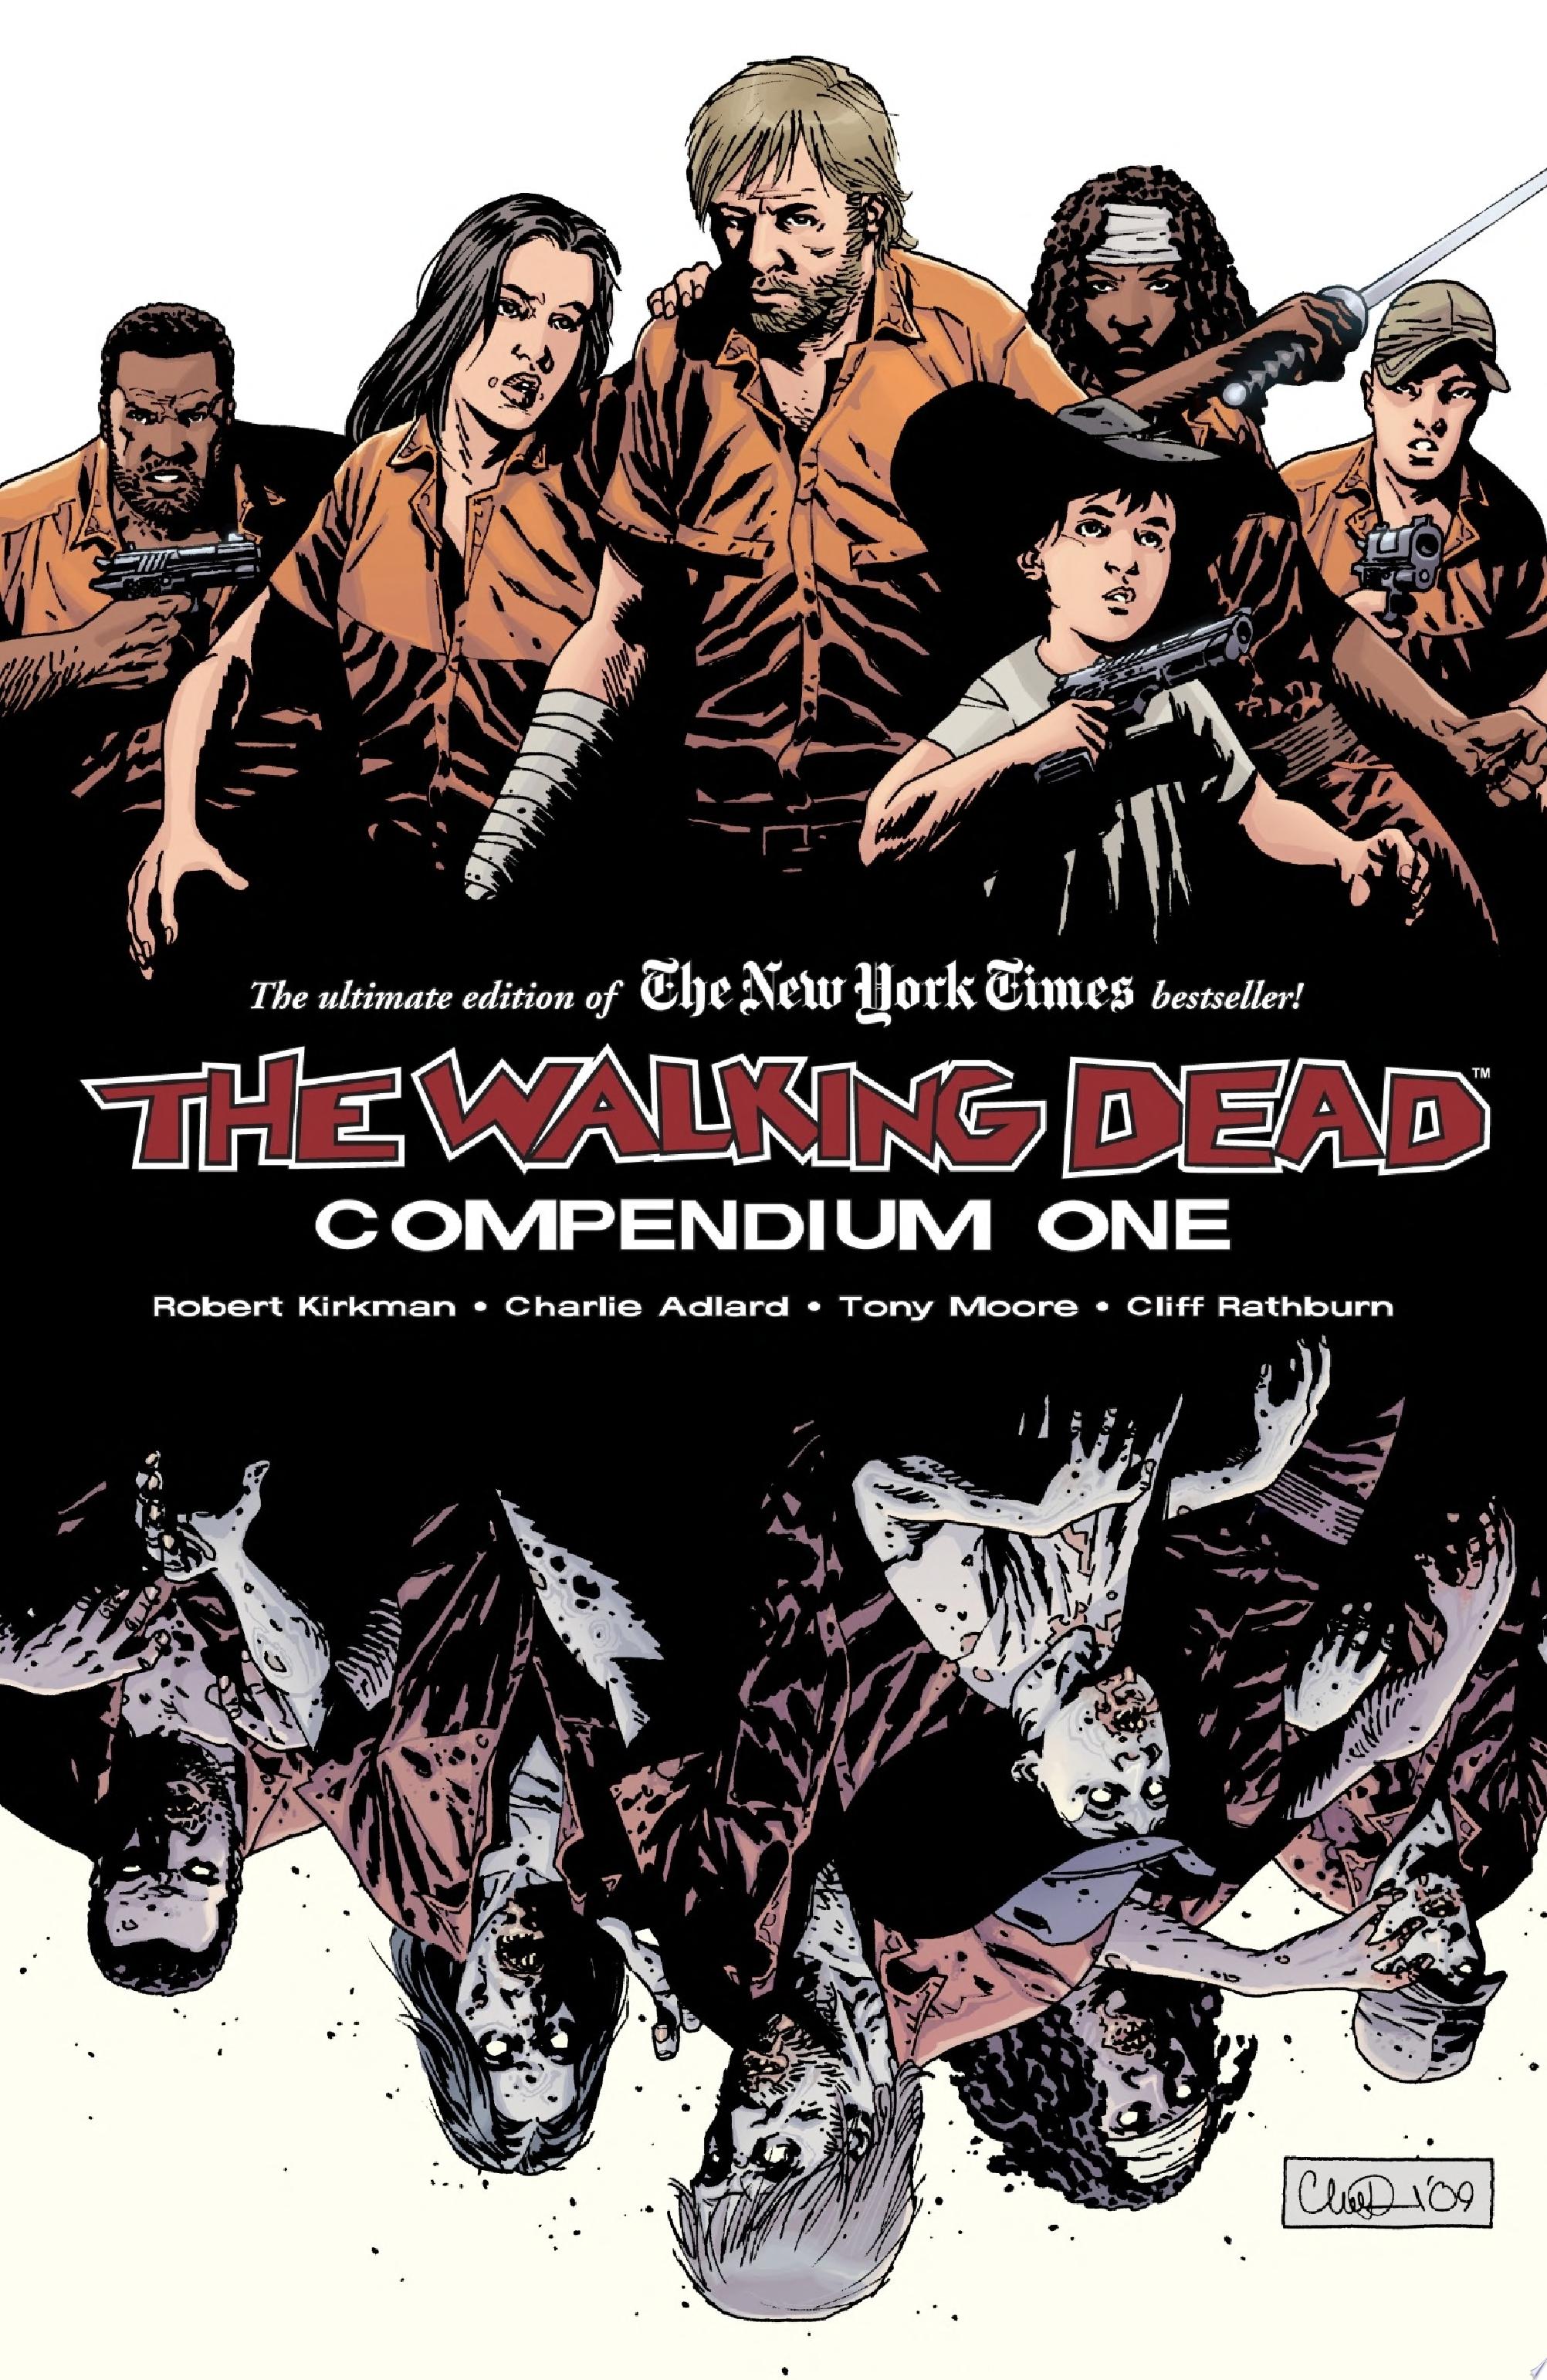 Image for "The Walking Dead: Compendium 1"